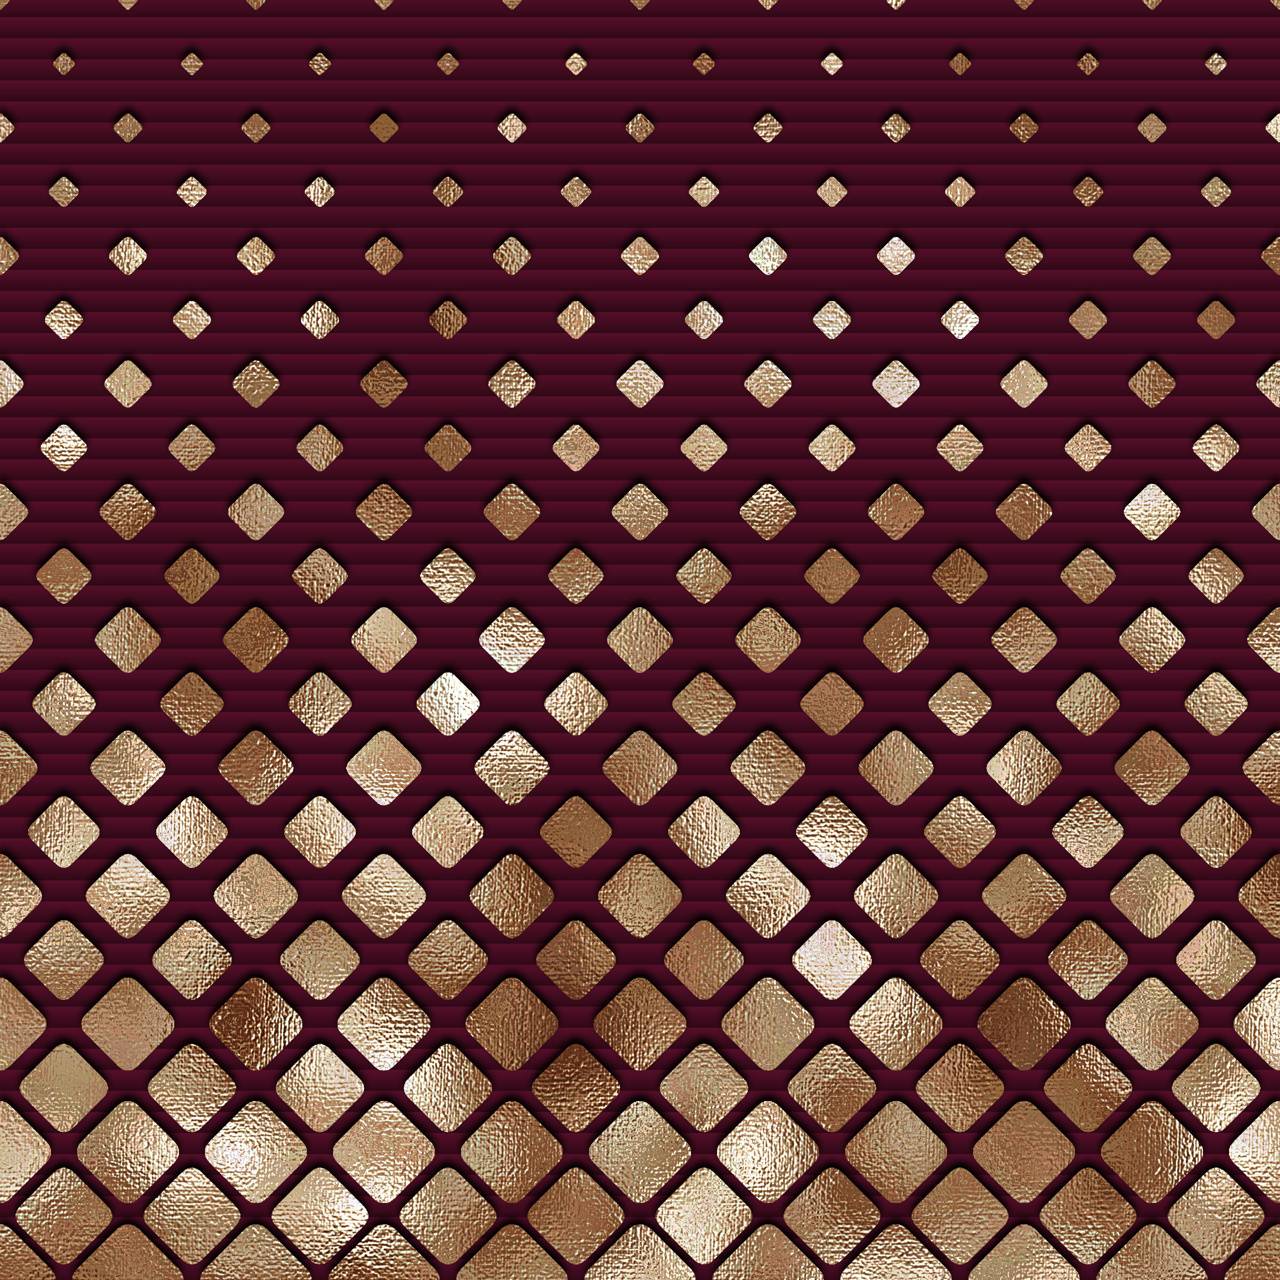 Burgundy  Gold  Gold wallpaper iphone Red and gold wallpaper Iphone  wallpaper girly